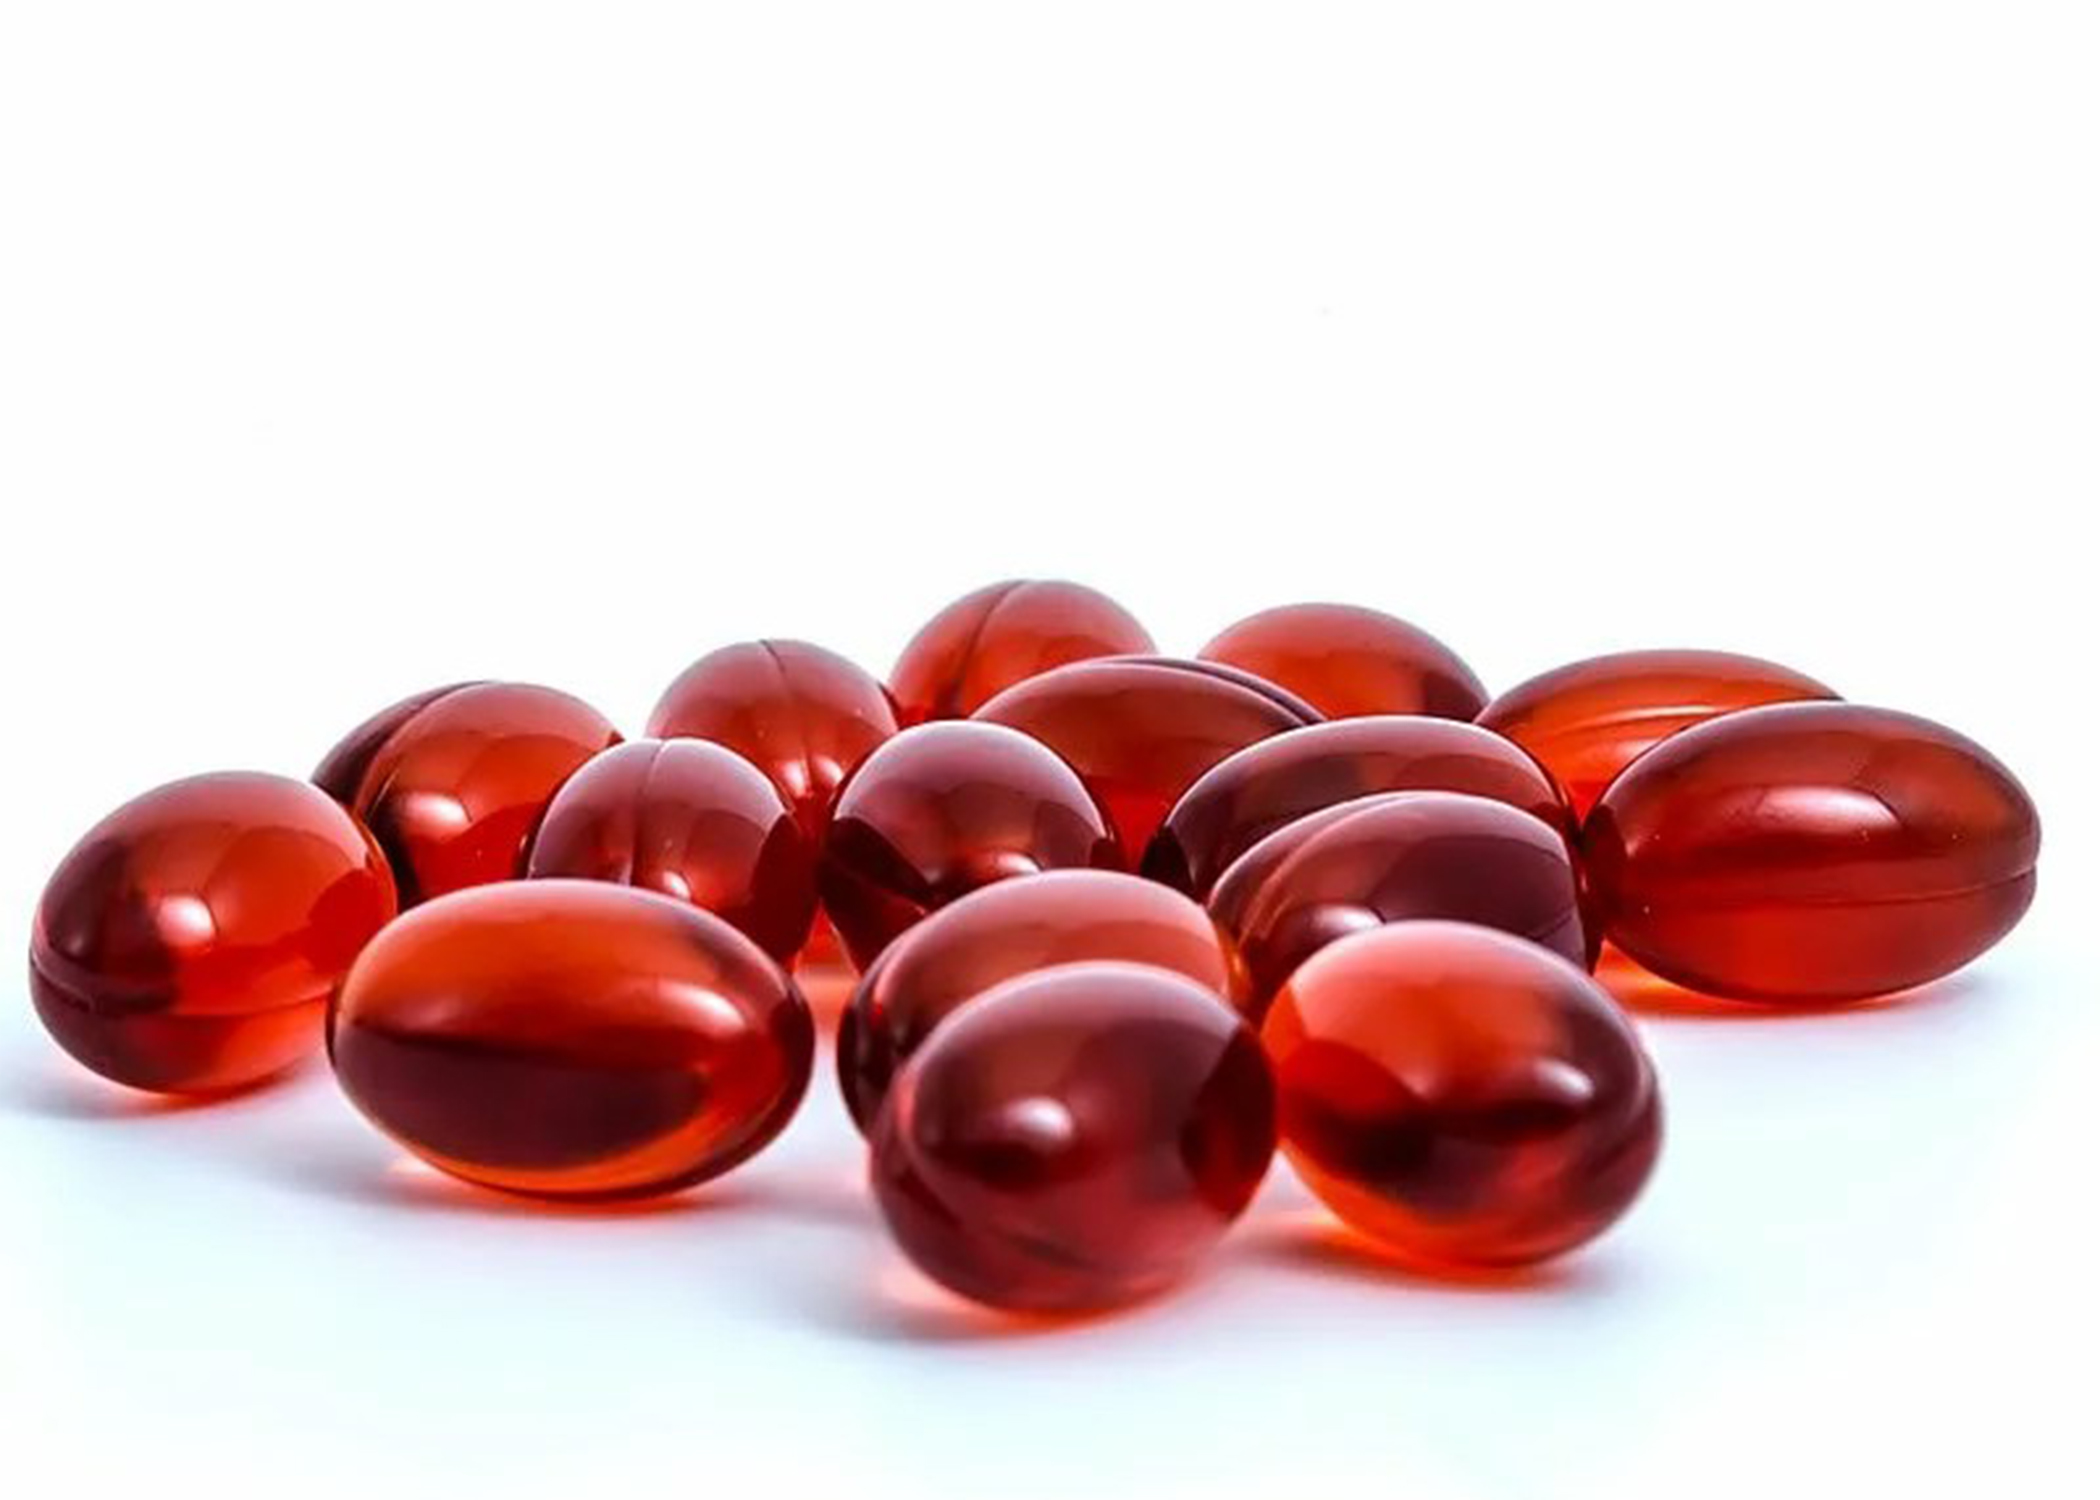 Krill Oil Benefits For DHA, EPA, and Choline